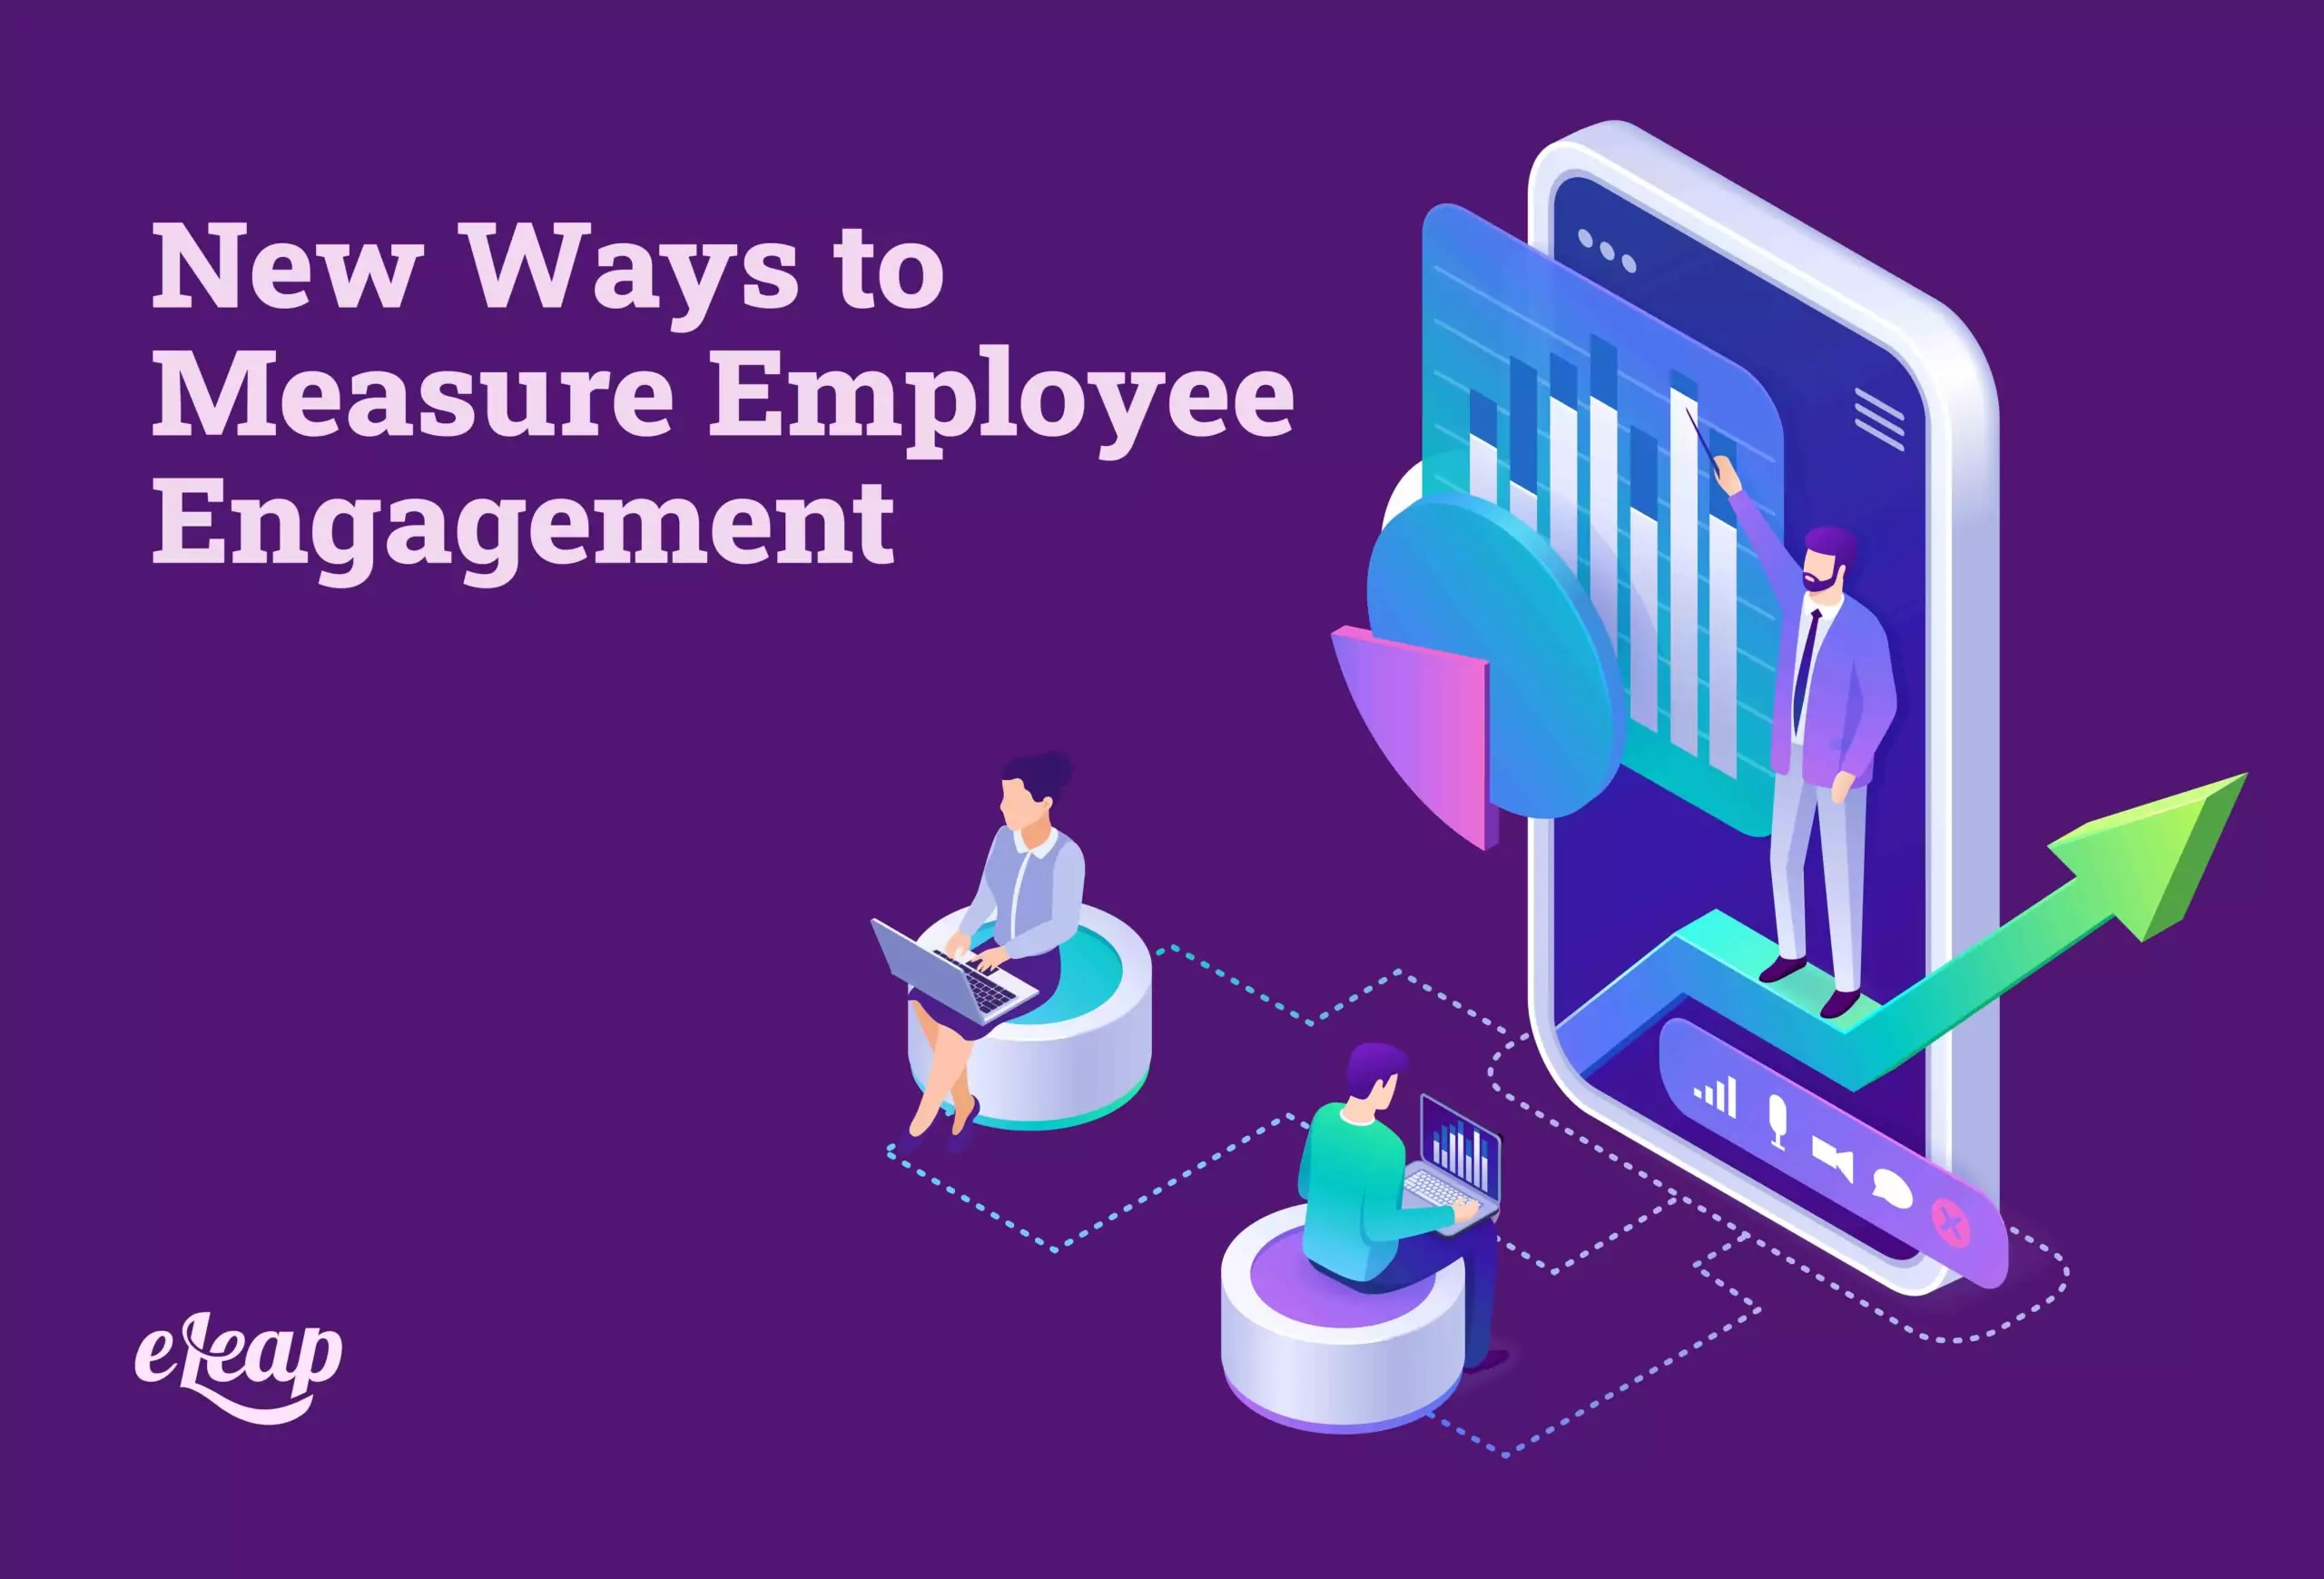 5 New Ways to Measure Employee Engagement